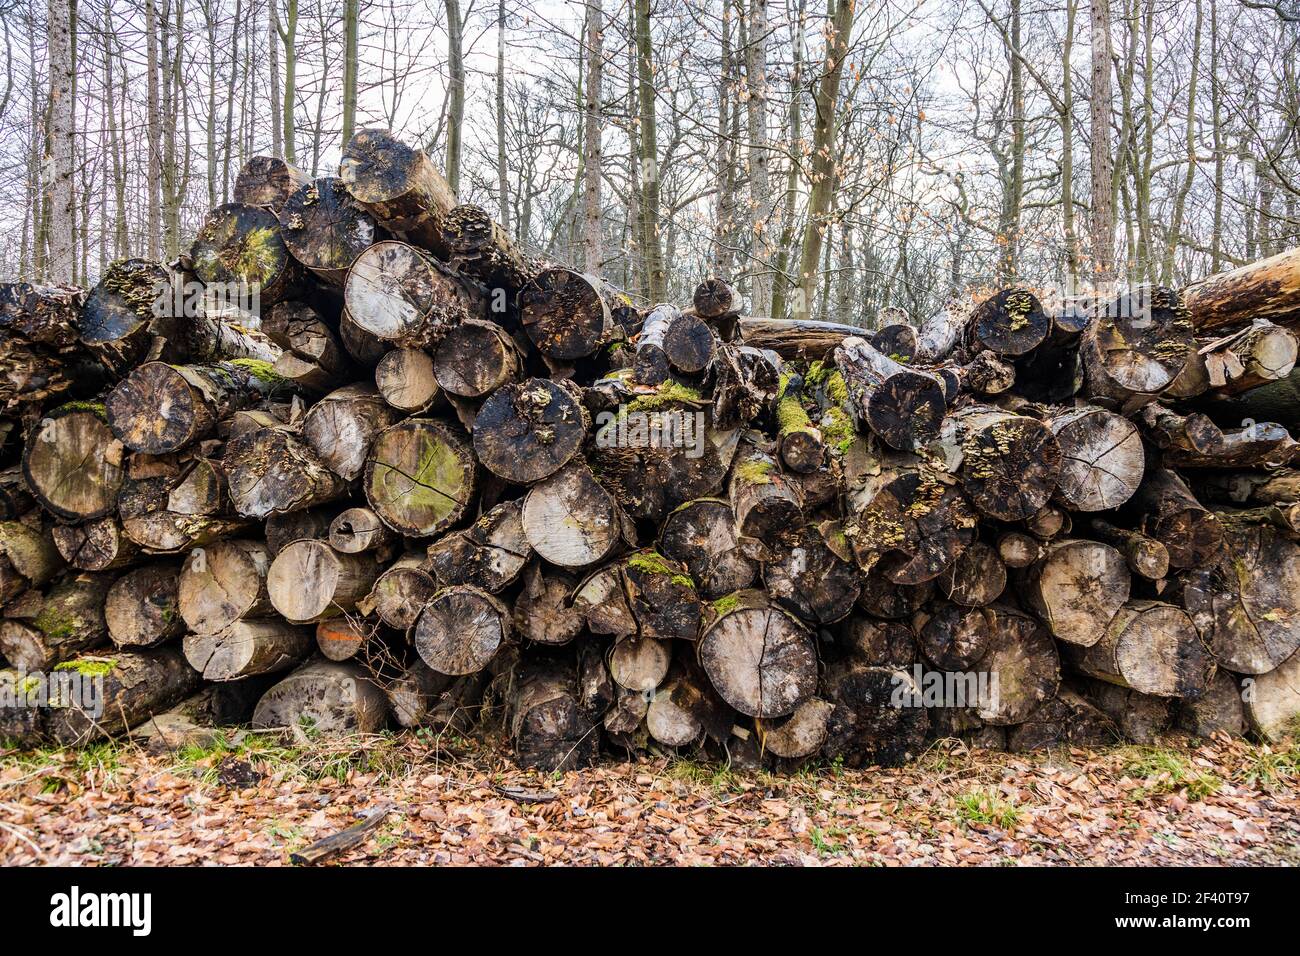 Stacked wooden logs overgrown with fungi, lichen and moss, Mülheim an der Ruhr, Ruhr Area, Germany, Europe Stock Photo